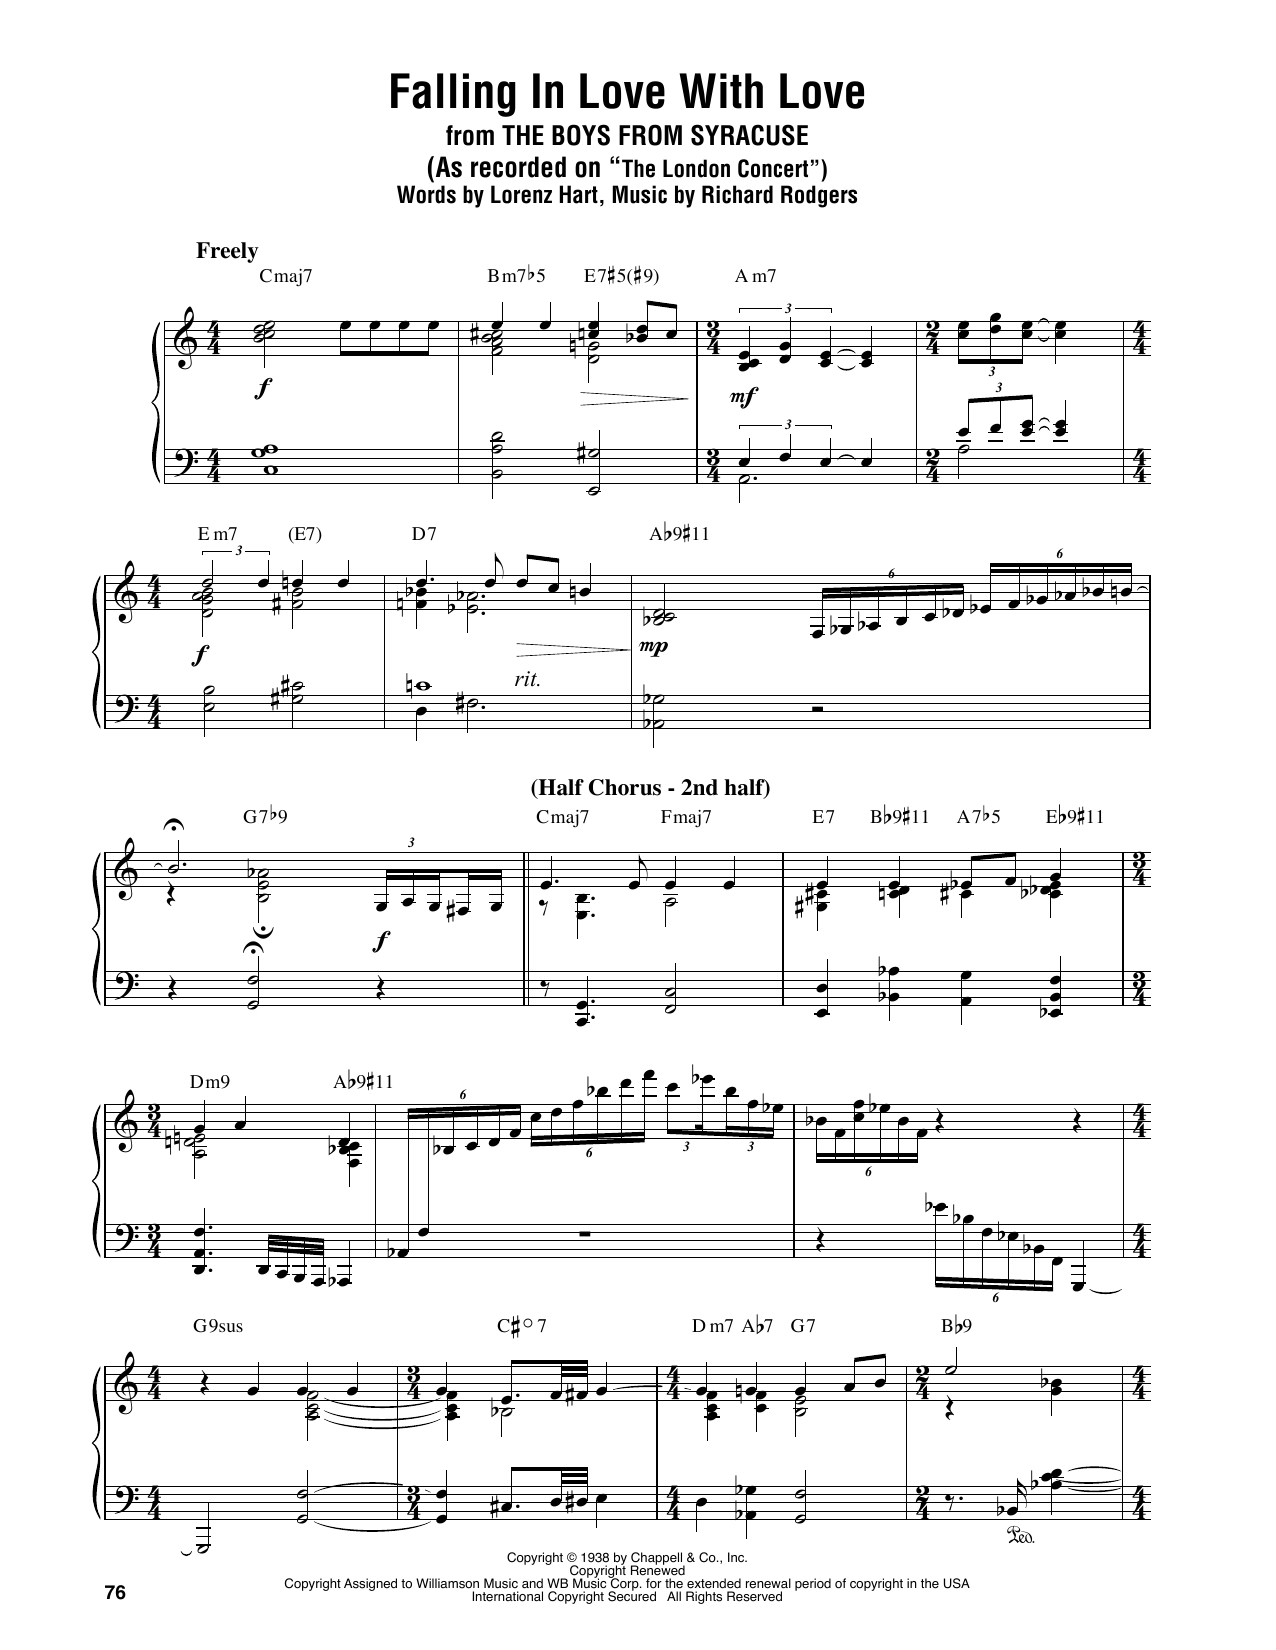 Download Oscar Peterson Falling In Love With Love Sheet Music